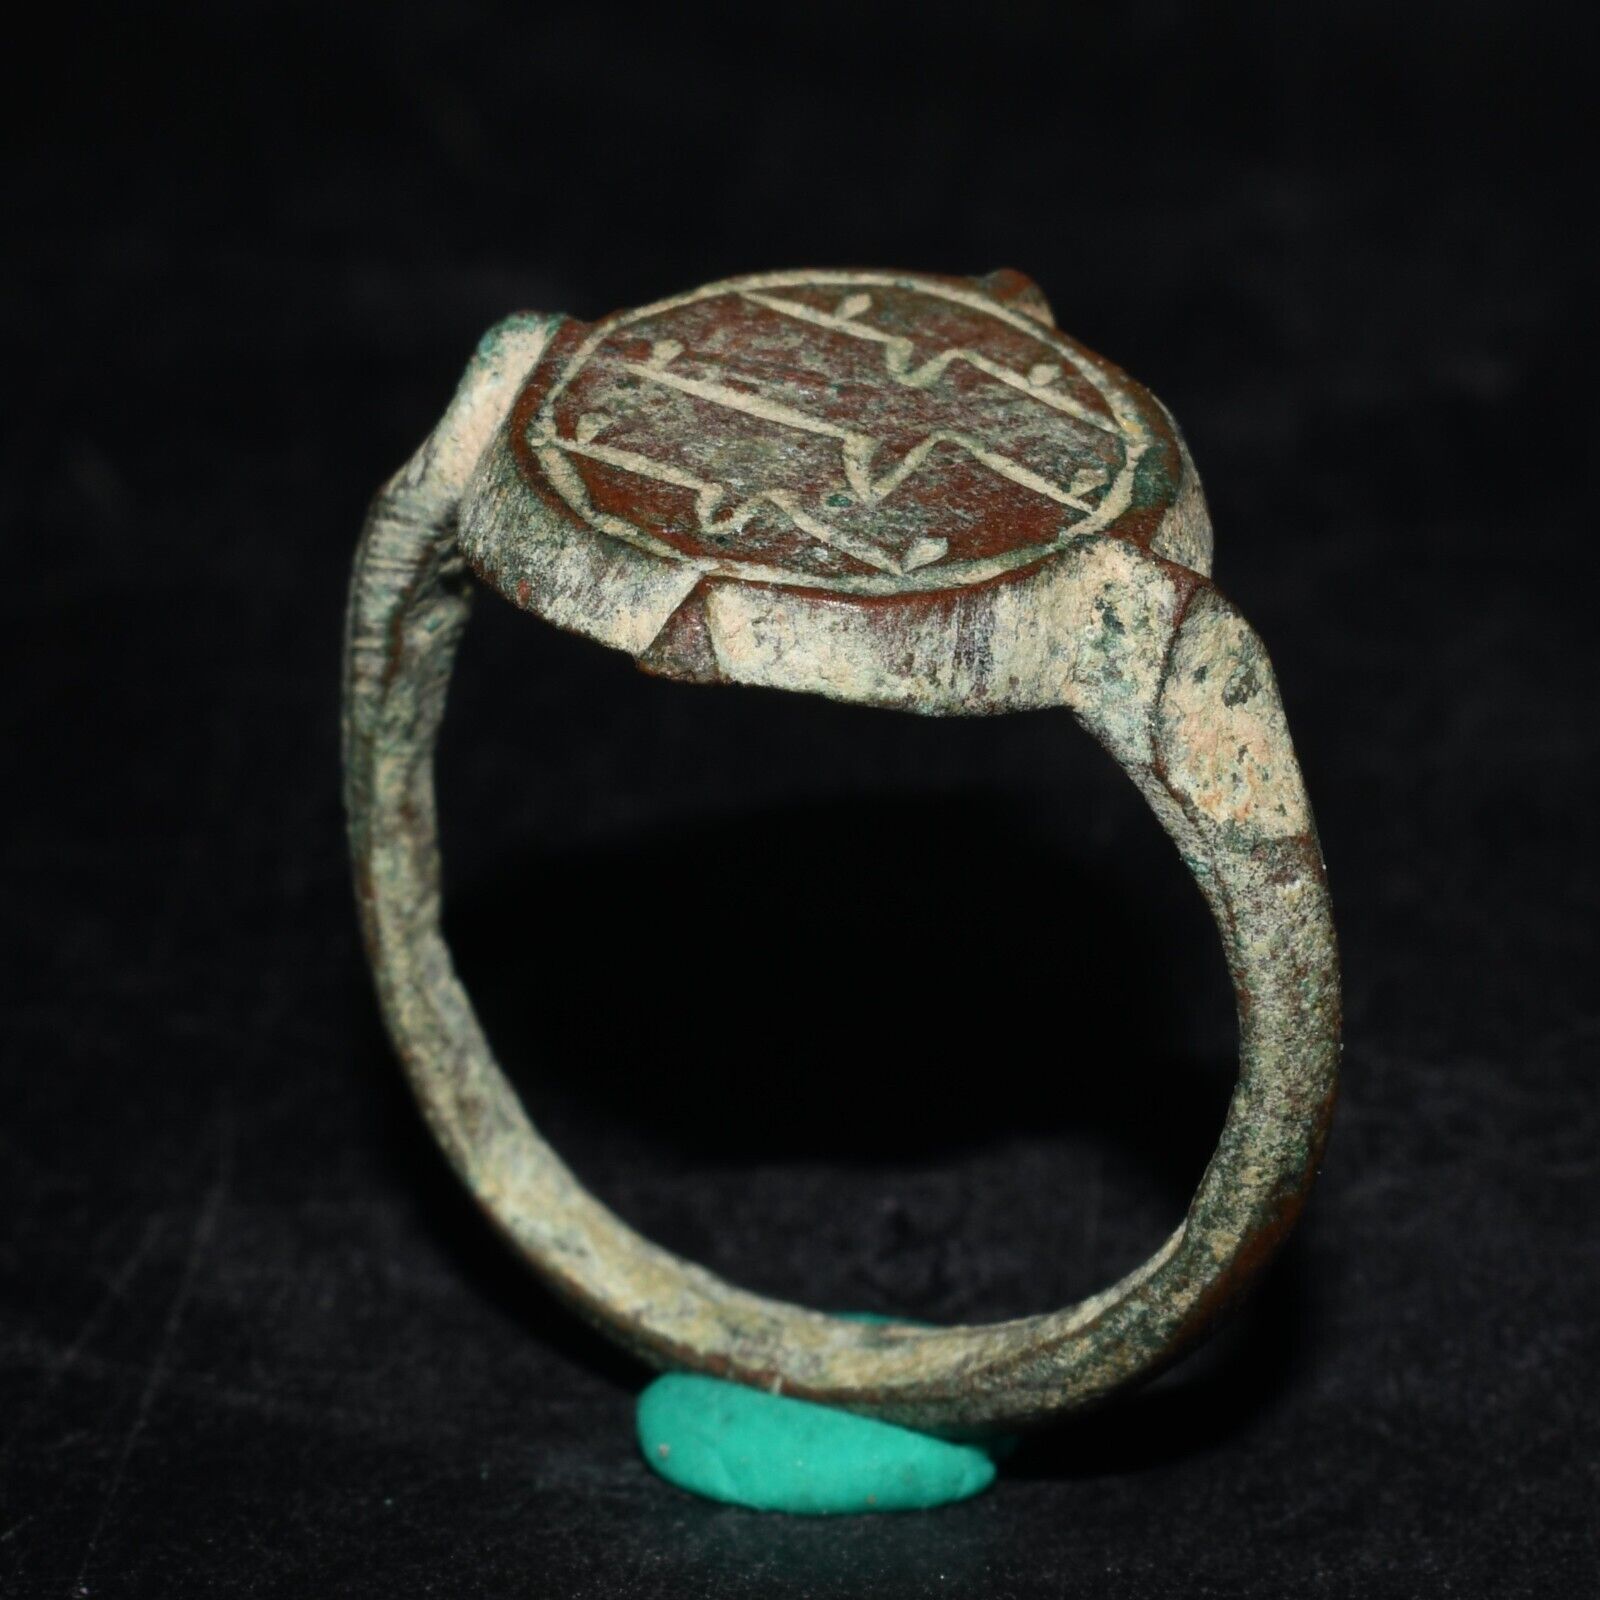 Genuine Ancient Medieval Bronze Ring with Engraved Bezel Ca. 14th Century